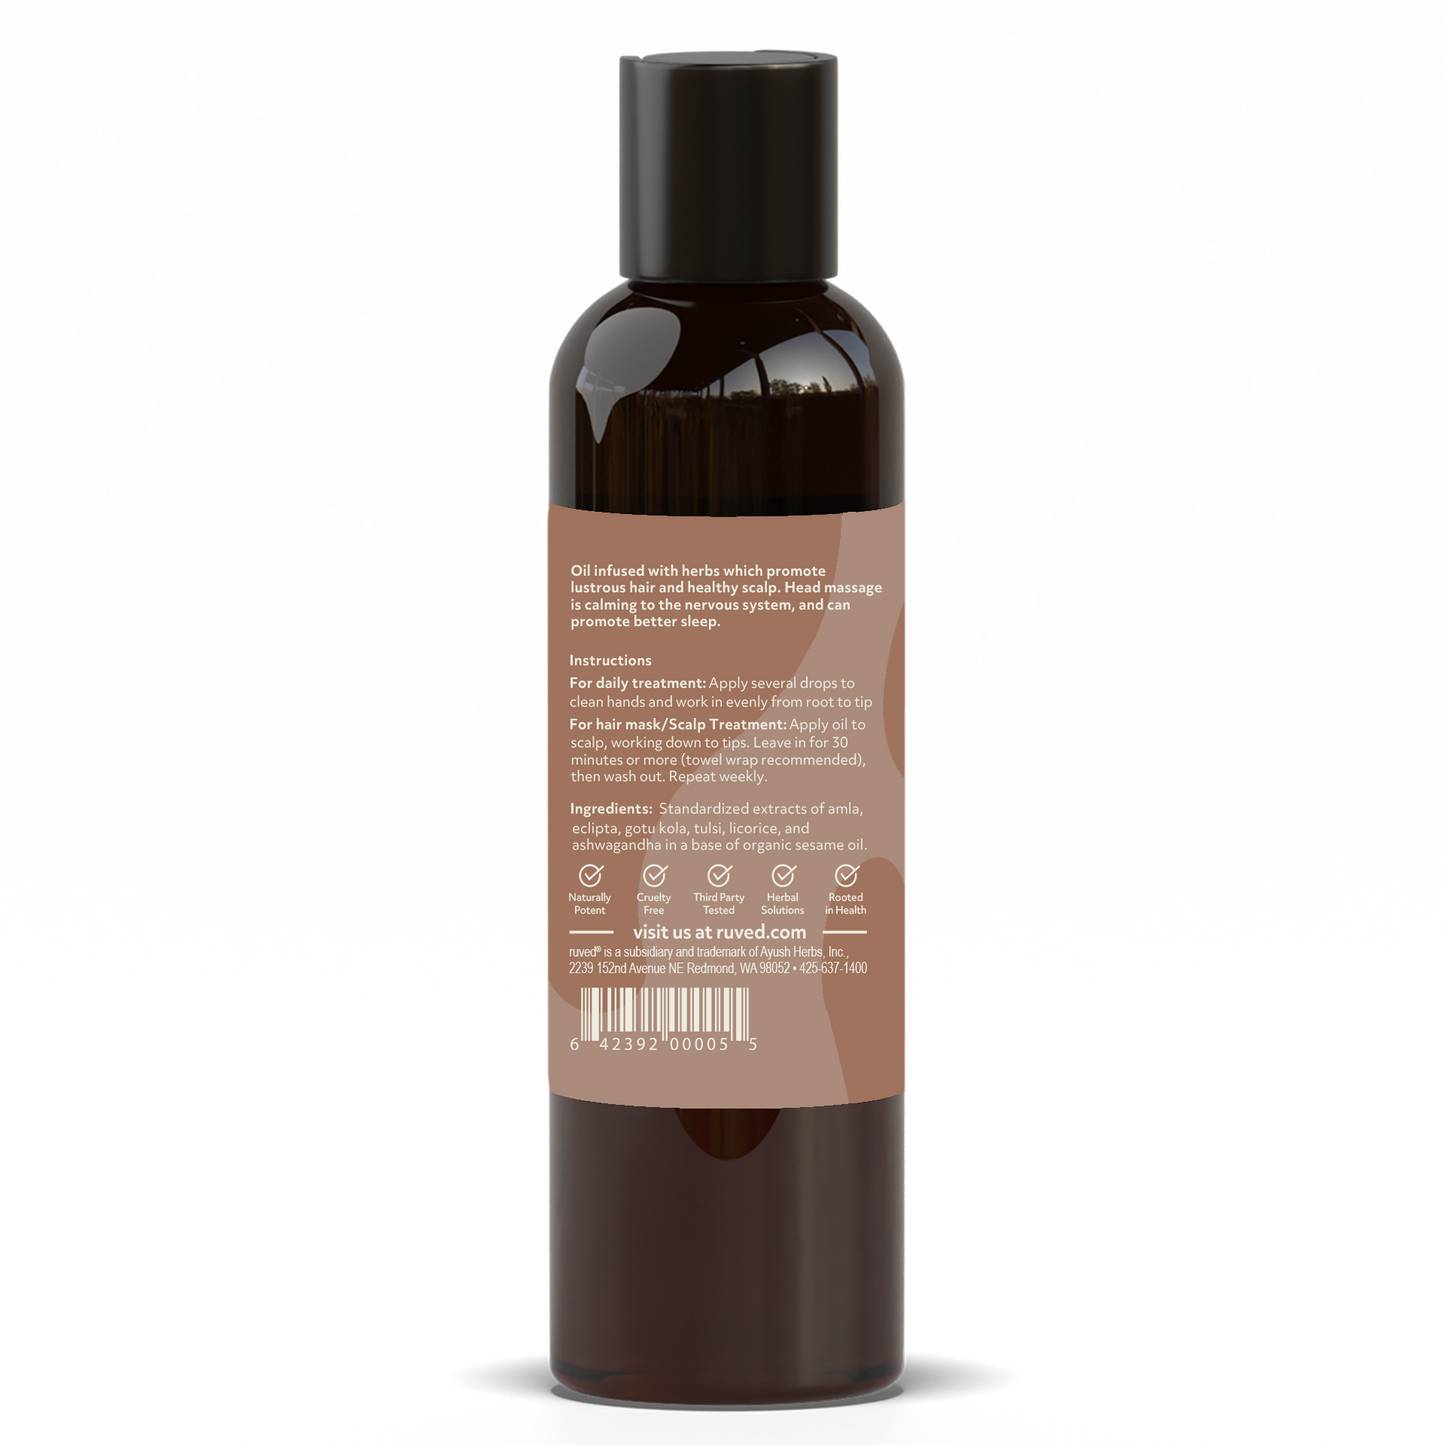 Rejuvenating Hair Oil bottle front Oil infused with herbs that promotes lustrous hair and healthy scalp by ruved herbal supplements and ayush herbs